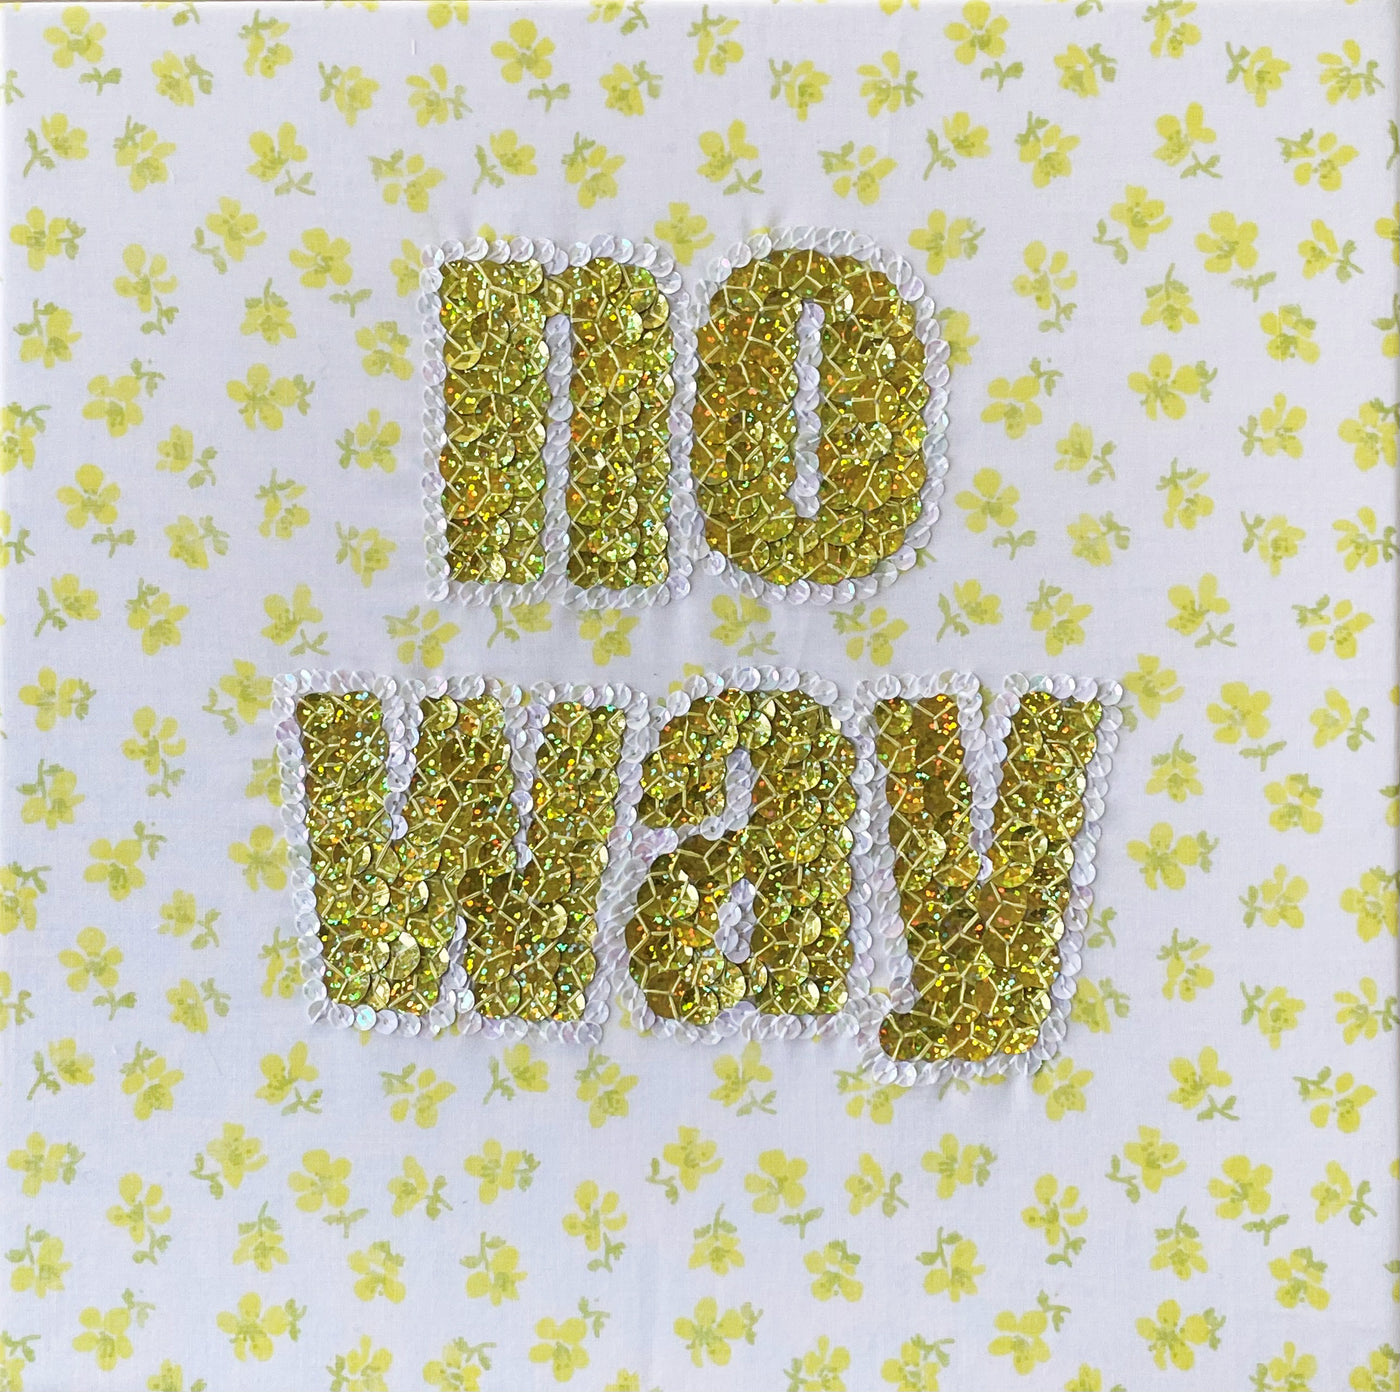 Andrew McPhail - no way